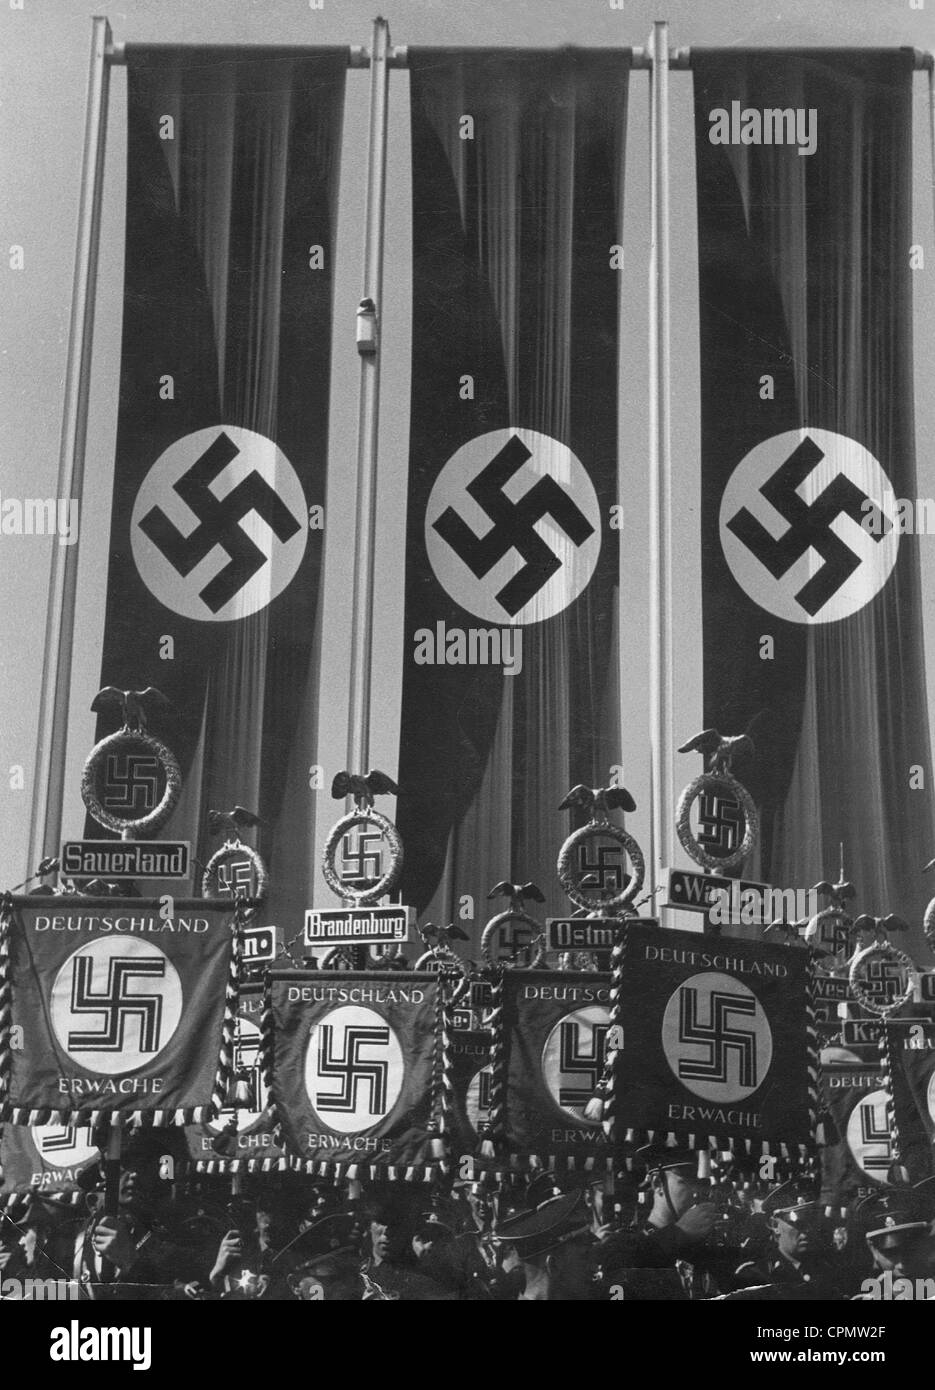 Swastika flags and banners Stock Photo